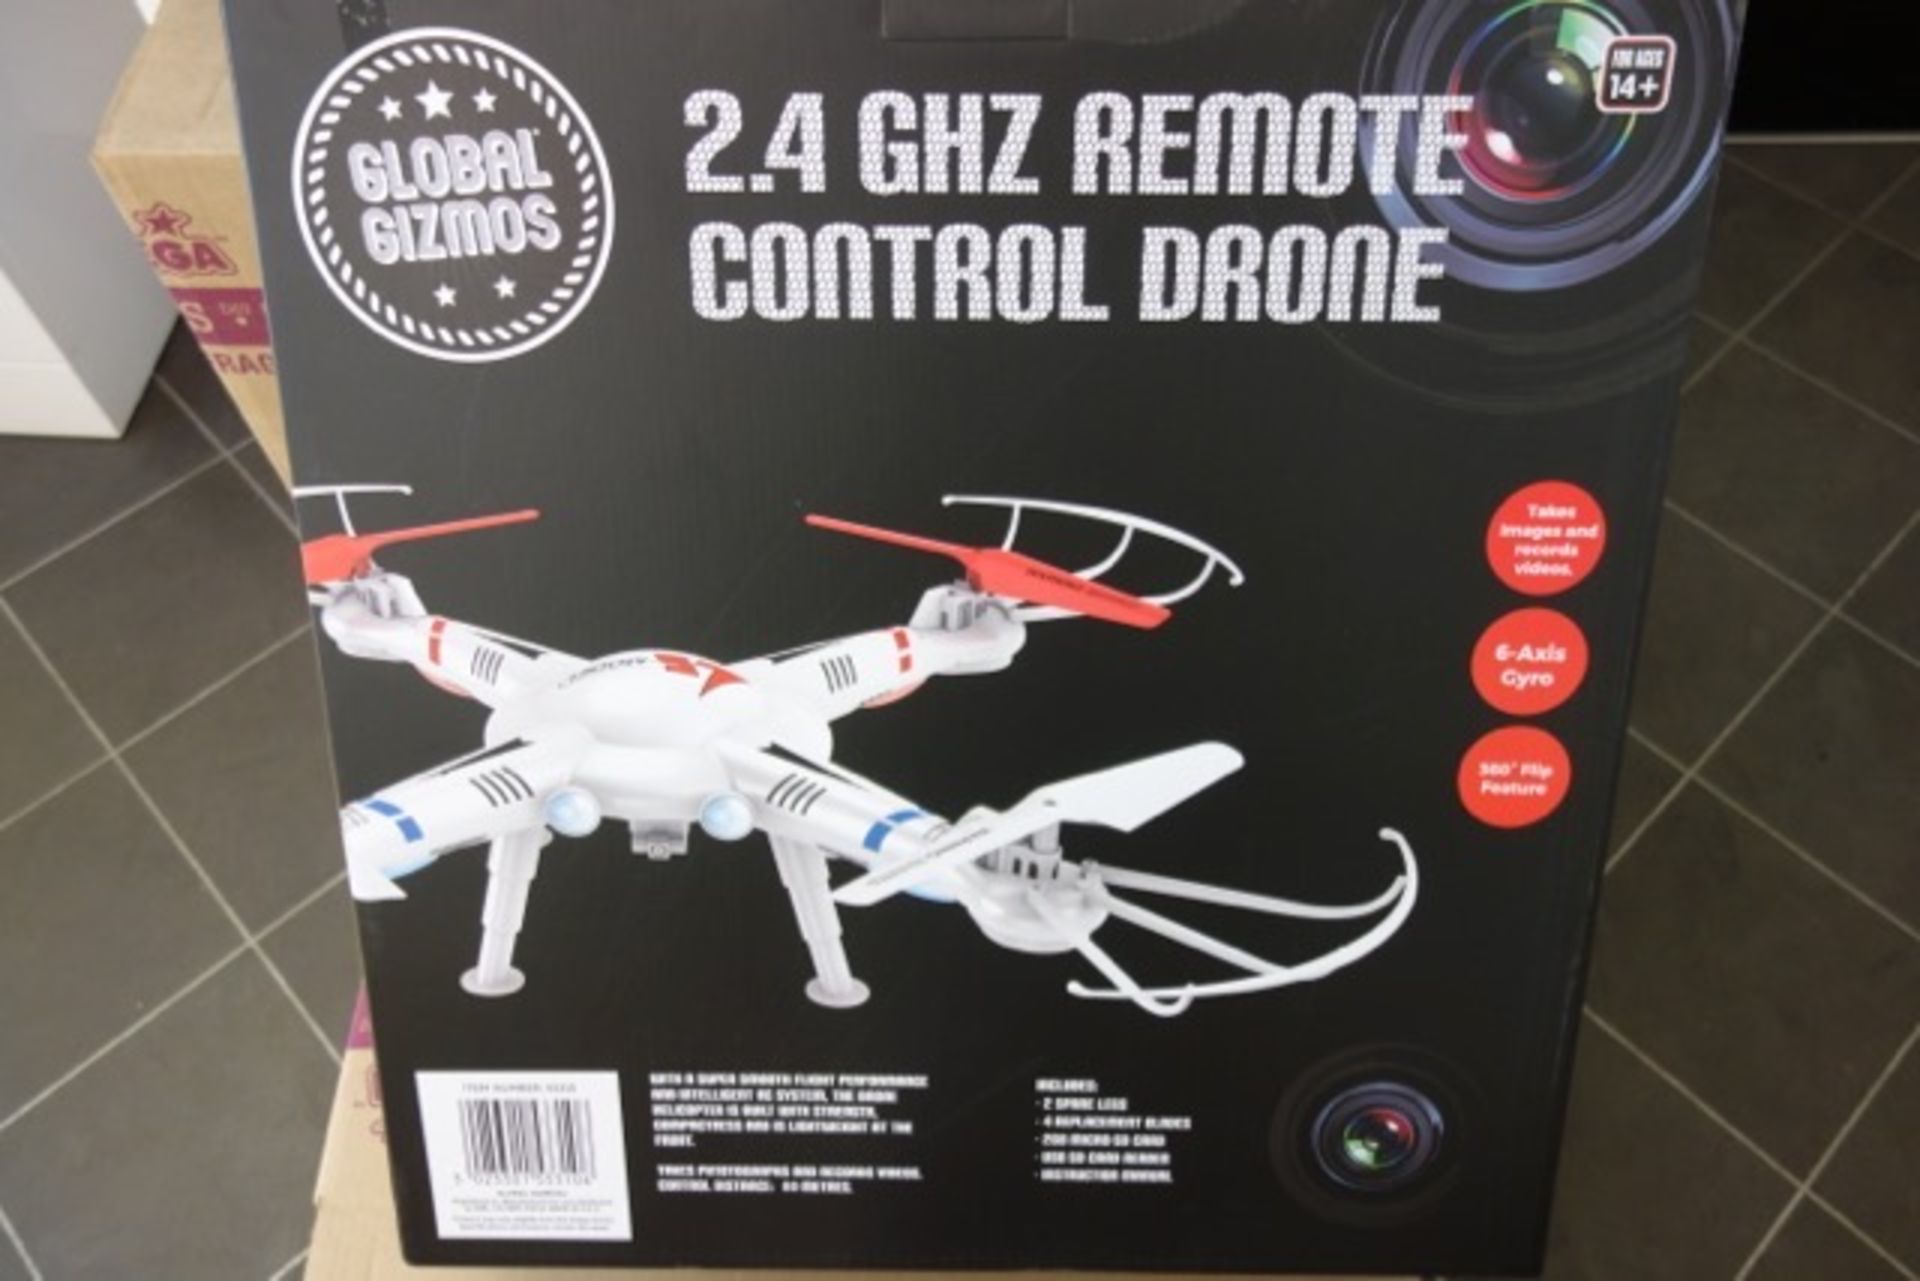 1 x Brand New Global Gizmos 2.4GHZ Remote Control Drone. Takes images & recordes videos, 6 axis - Image 3 of 4